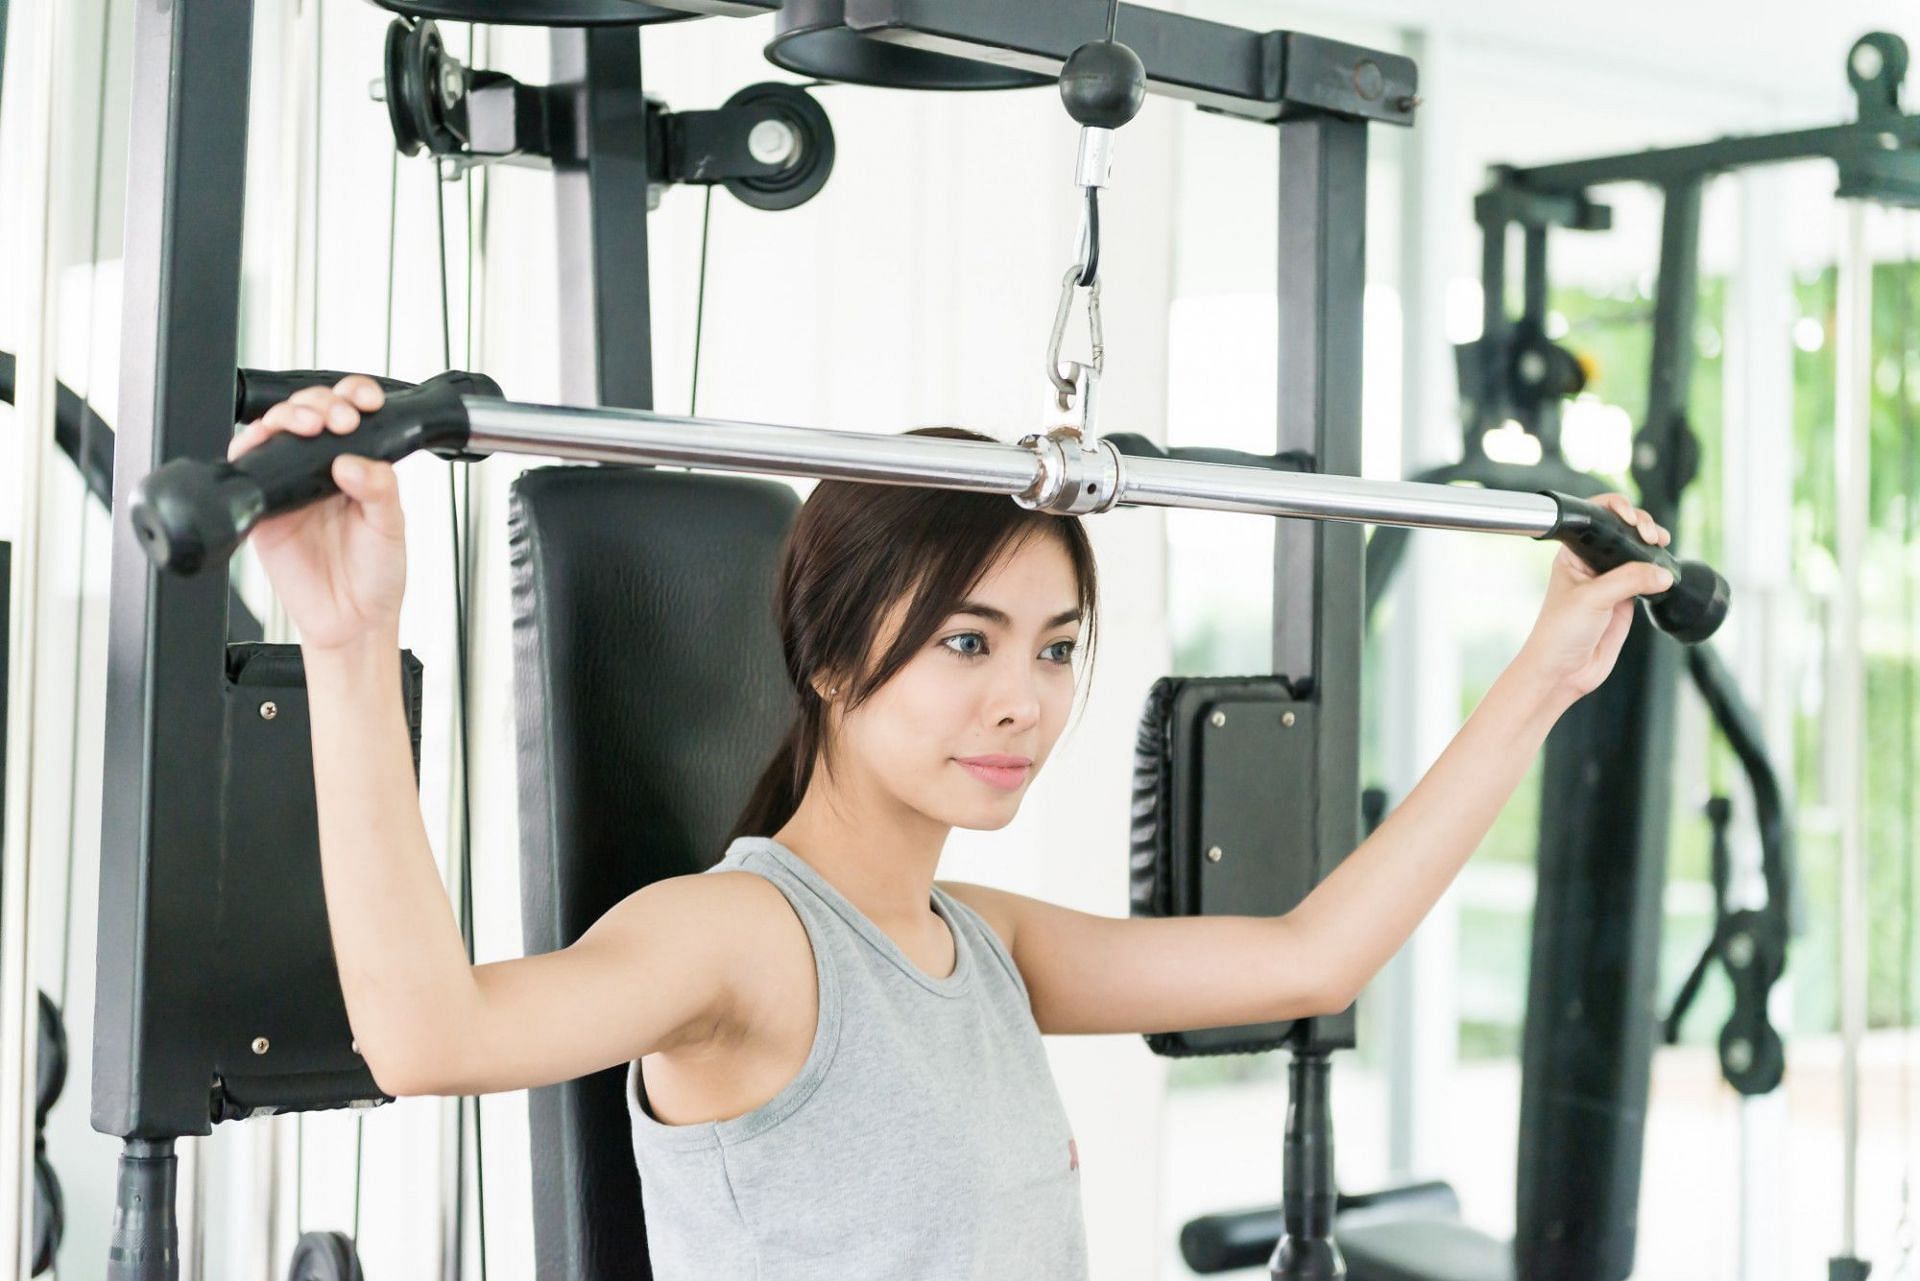 What are the Benefits of Using a Lateral Raise Machine? (Image via Freepik)